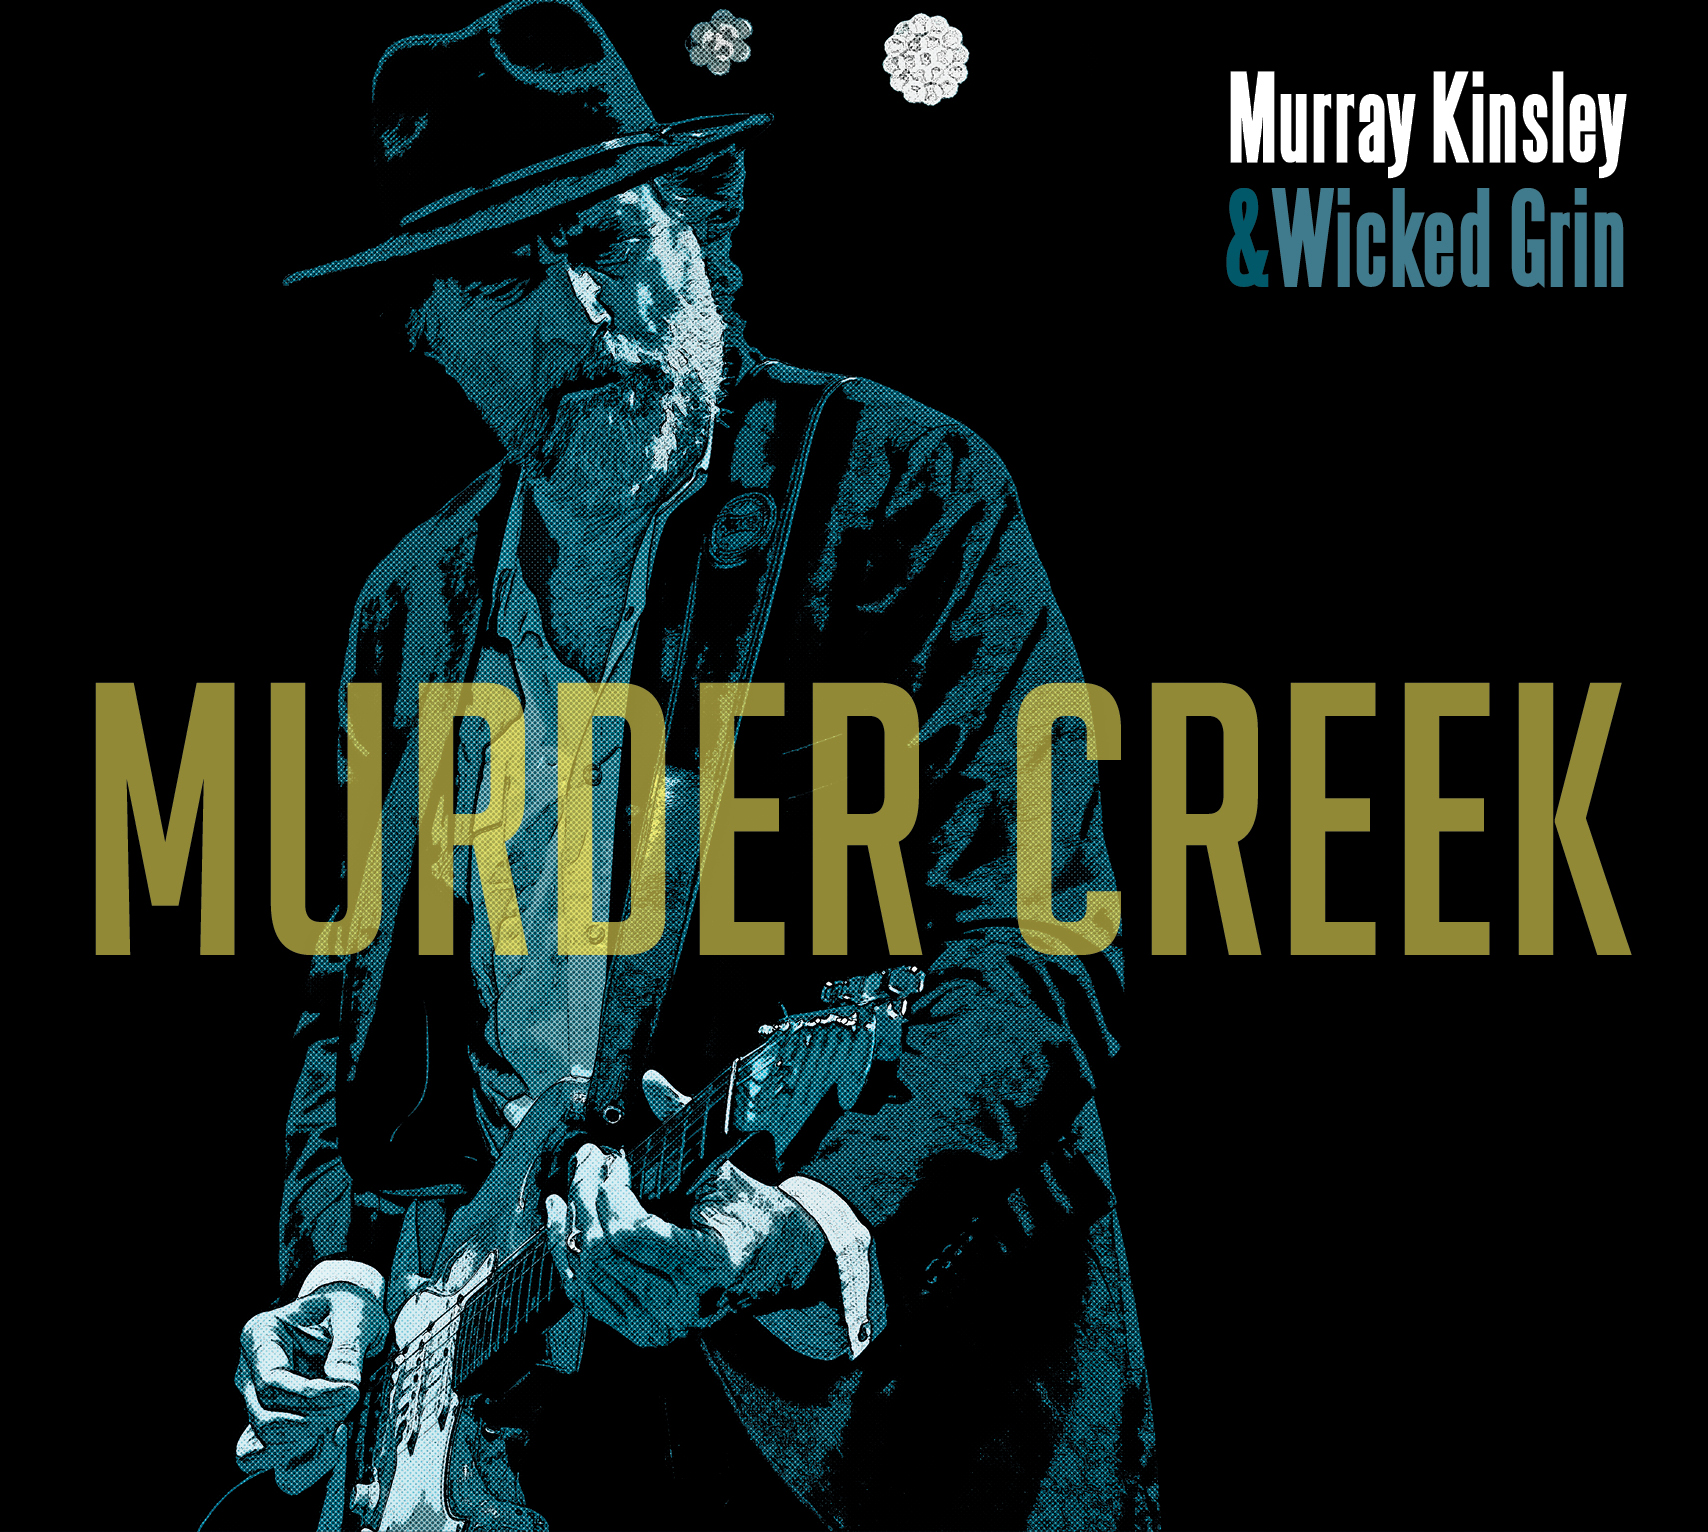 Murder Creek CD Cover - Wicked Grin